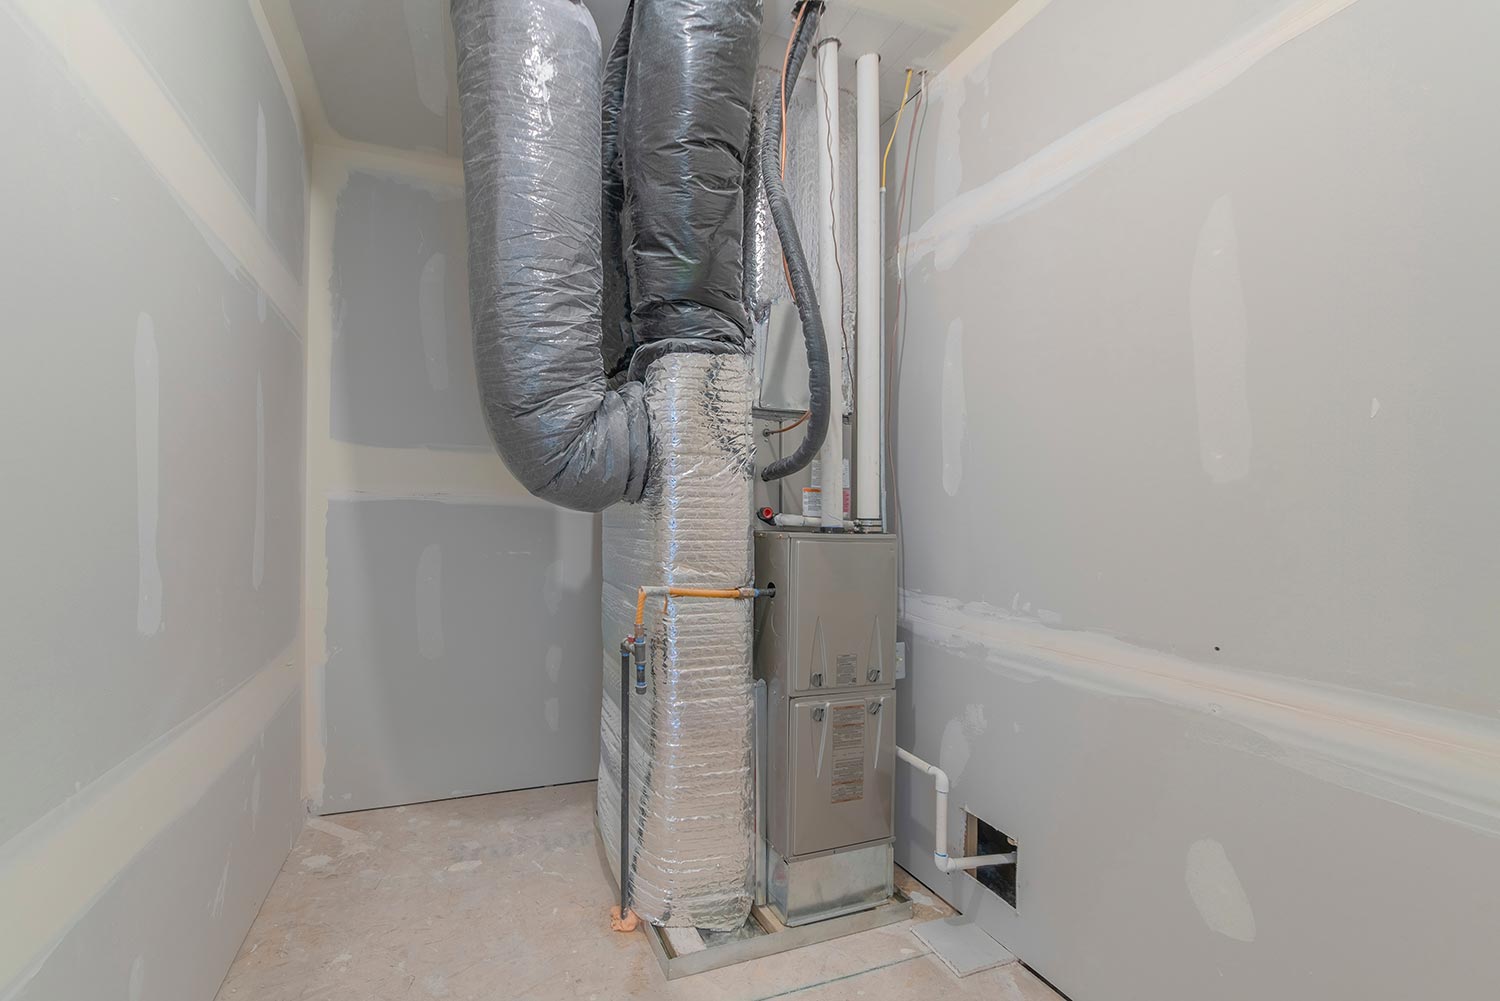 HVAC system inside a utility closet room with white markings on the wall